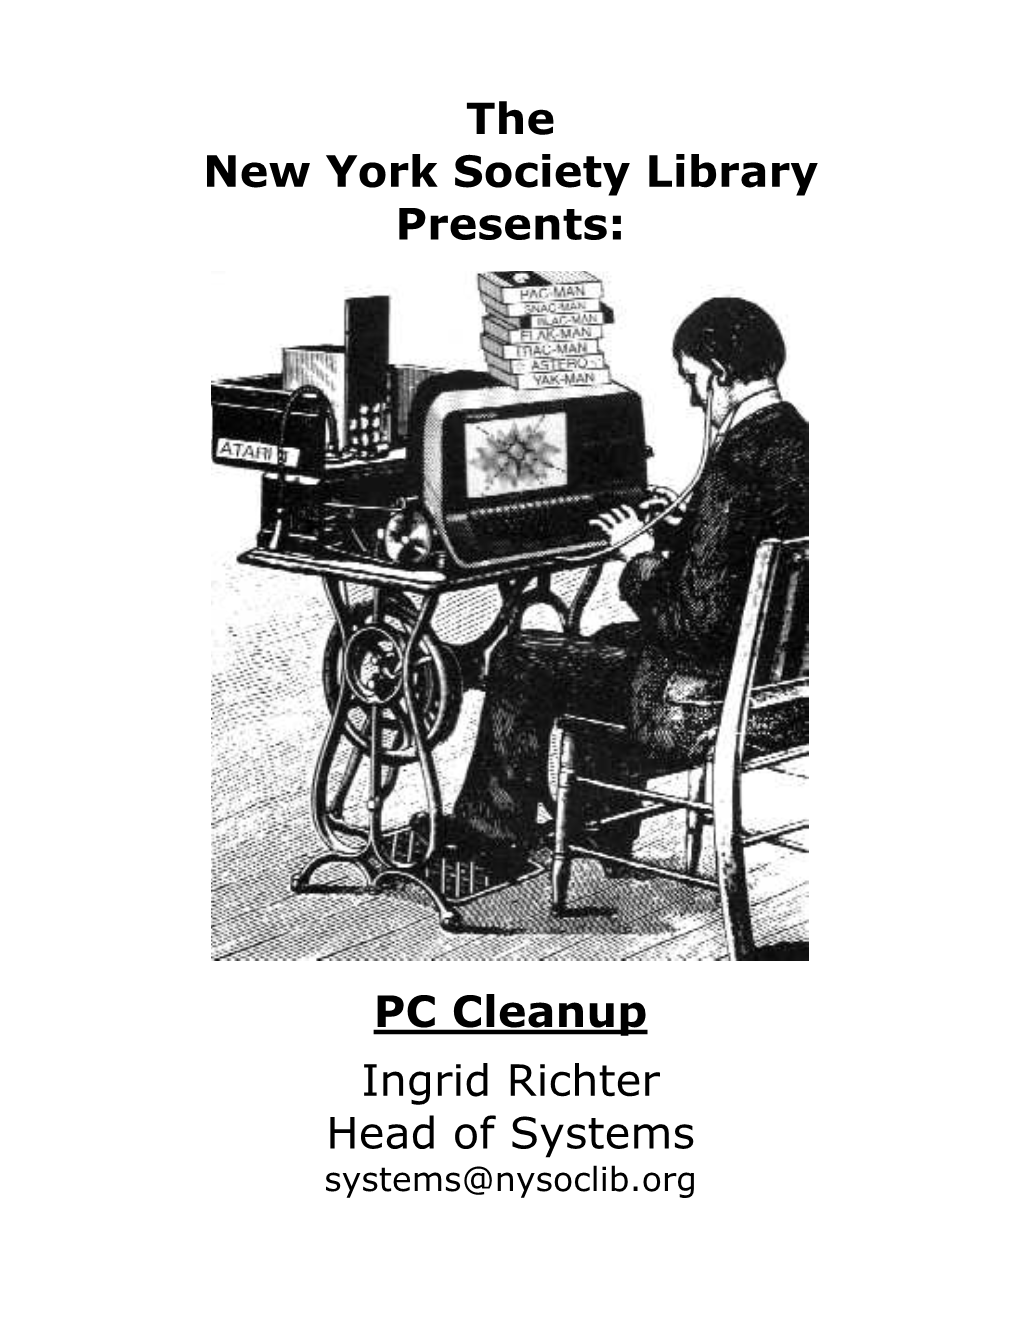 The New York Society Library Presents: PC Cleanup Ingrid